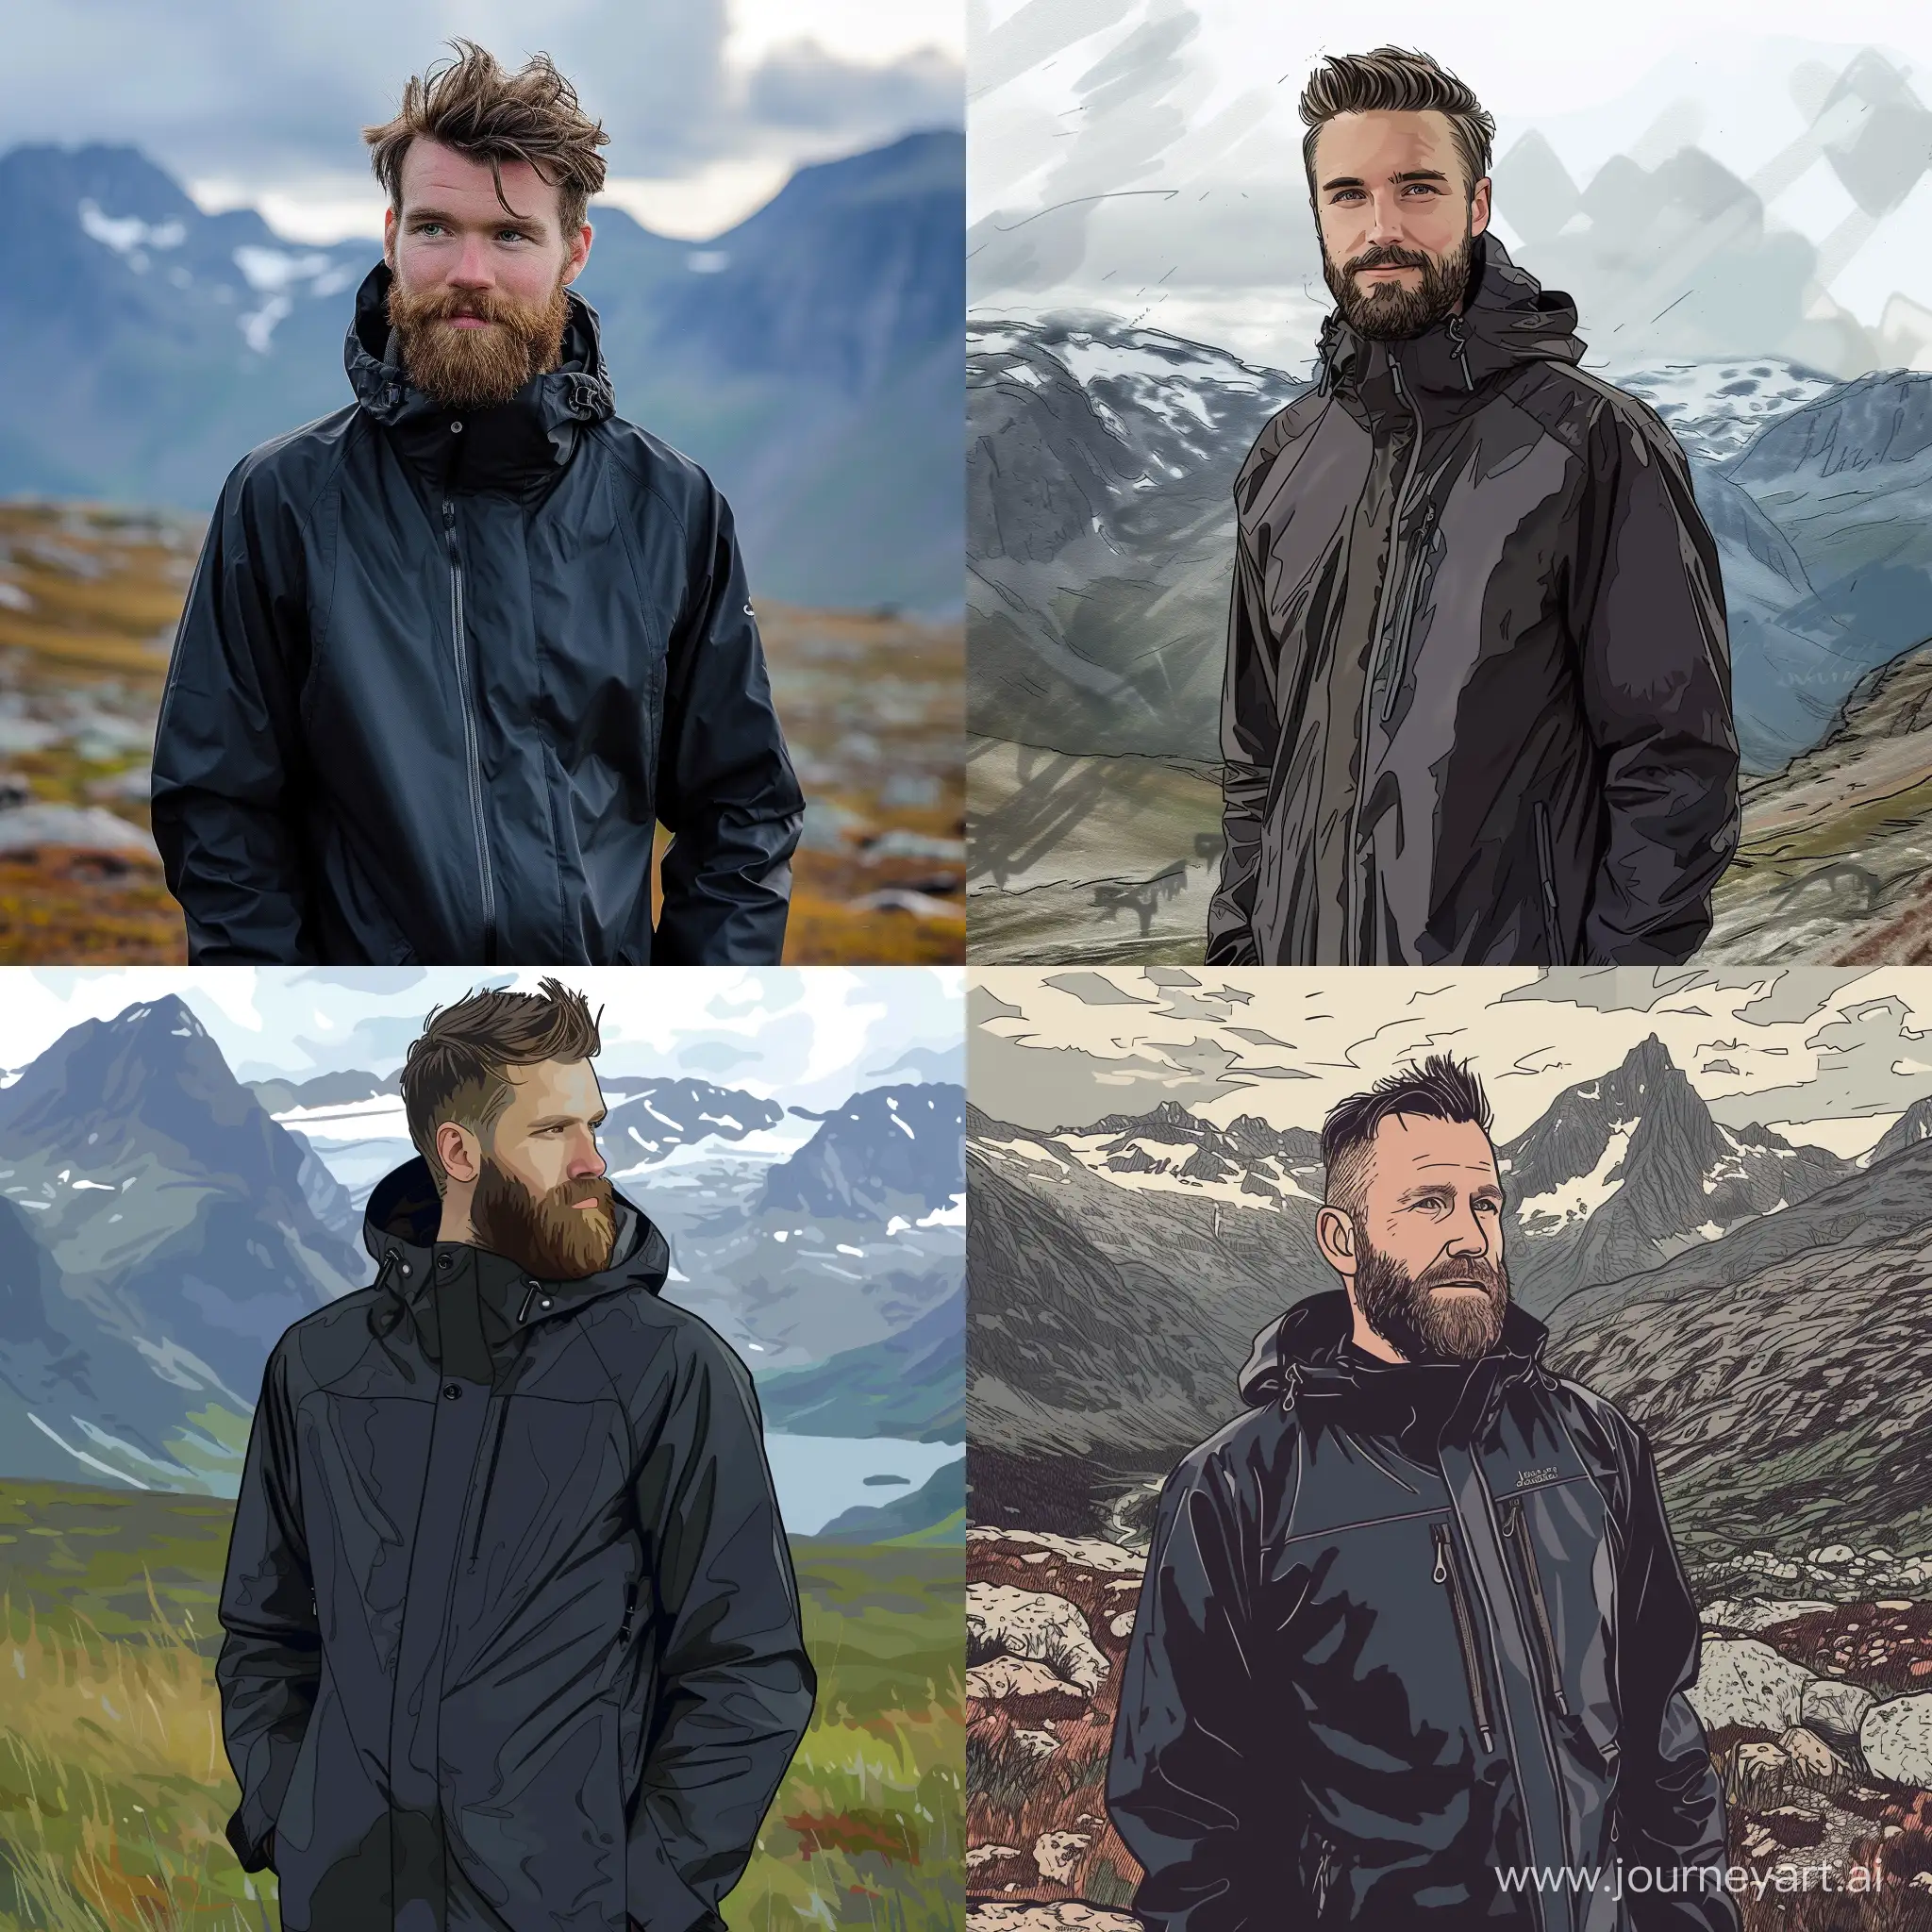 draw a rain cout for the nordic climate. The jacket is black. A man with beard and a nice head hair standing in the jotunheimen, with mountains in the bacground.